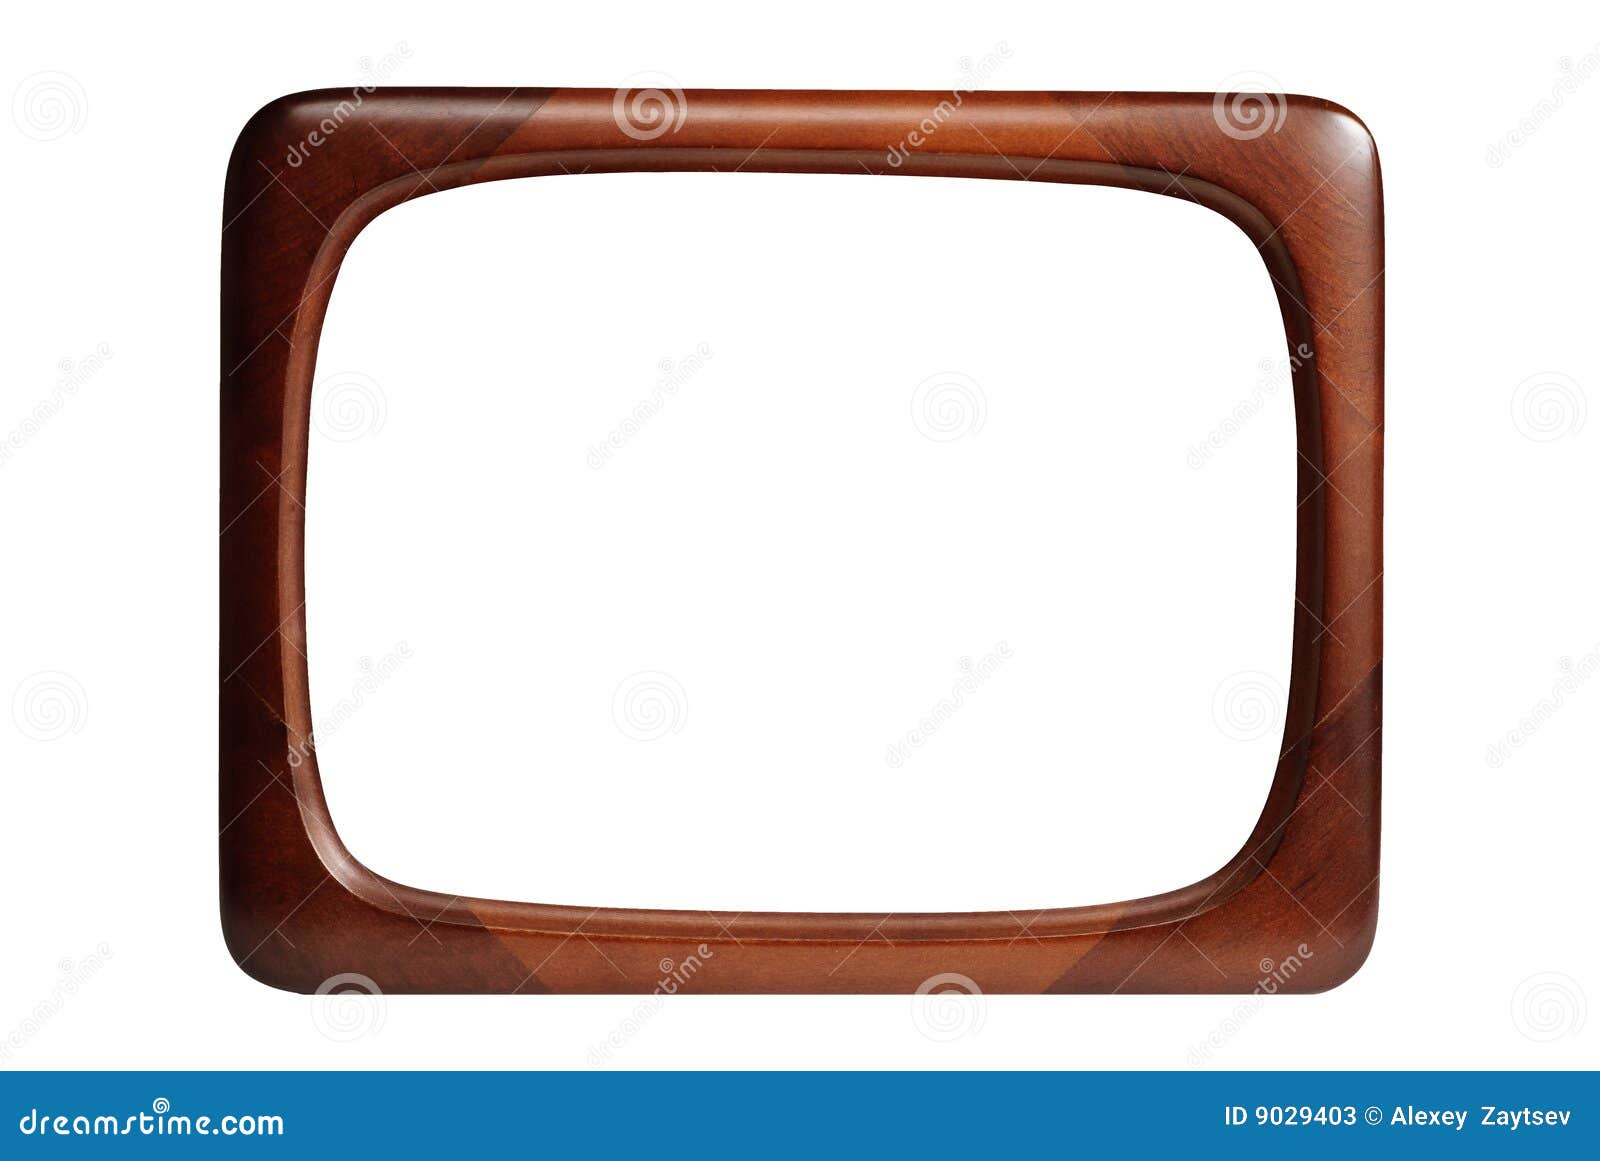 Old Fashioned Picture Frame Stock Photos - Image: 9029403